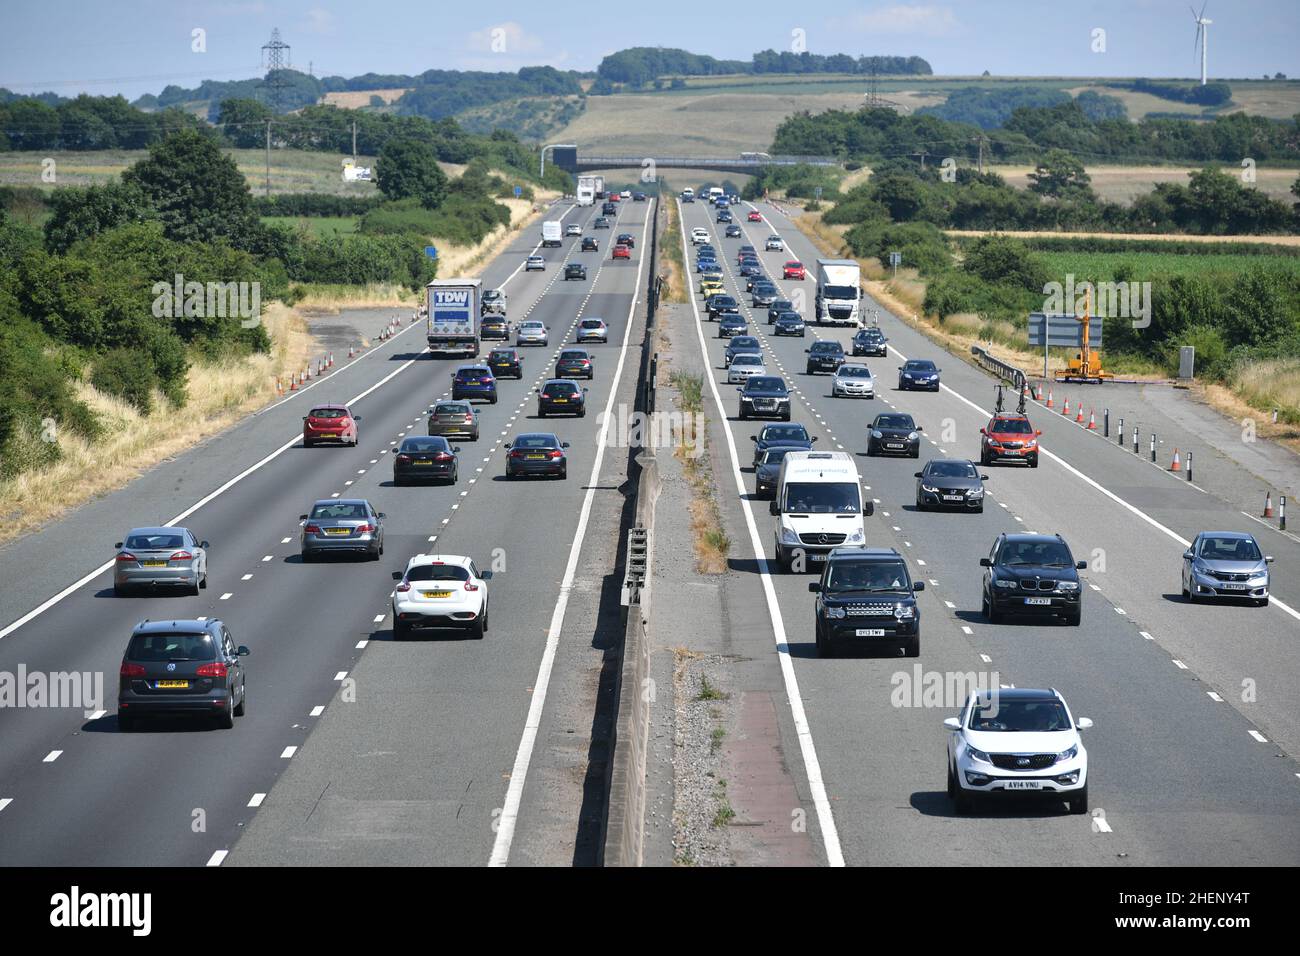 File photo dated 07/07/18 of vehicles travelling along the M4 motorway near Bristol. Typical car insurance premiums started to rise for some age groups and in some parts of Britain towards the end of last year, analysis has found. Issue date: Wednesday January 12, 2022. Overall, the average cost edged downwards by 0.6% between August and November 2021, to reach £782, according to Consumer Intelligence. However, prices for some geographical areas and for older drivers started to creep up. Stock Photo